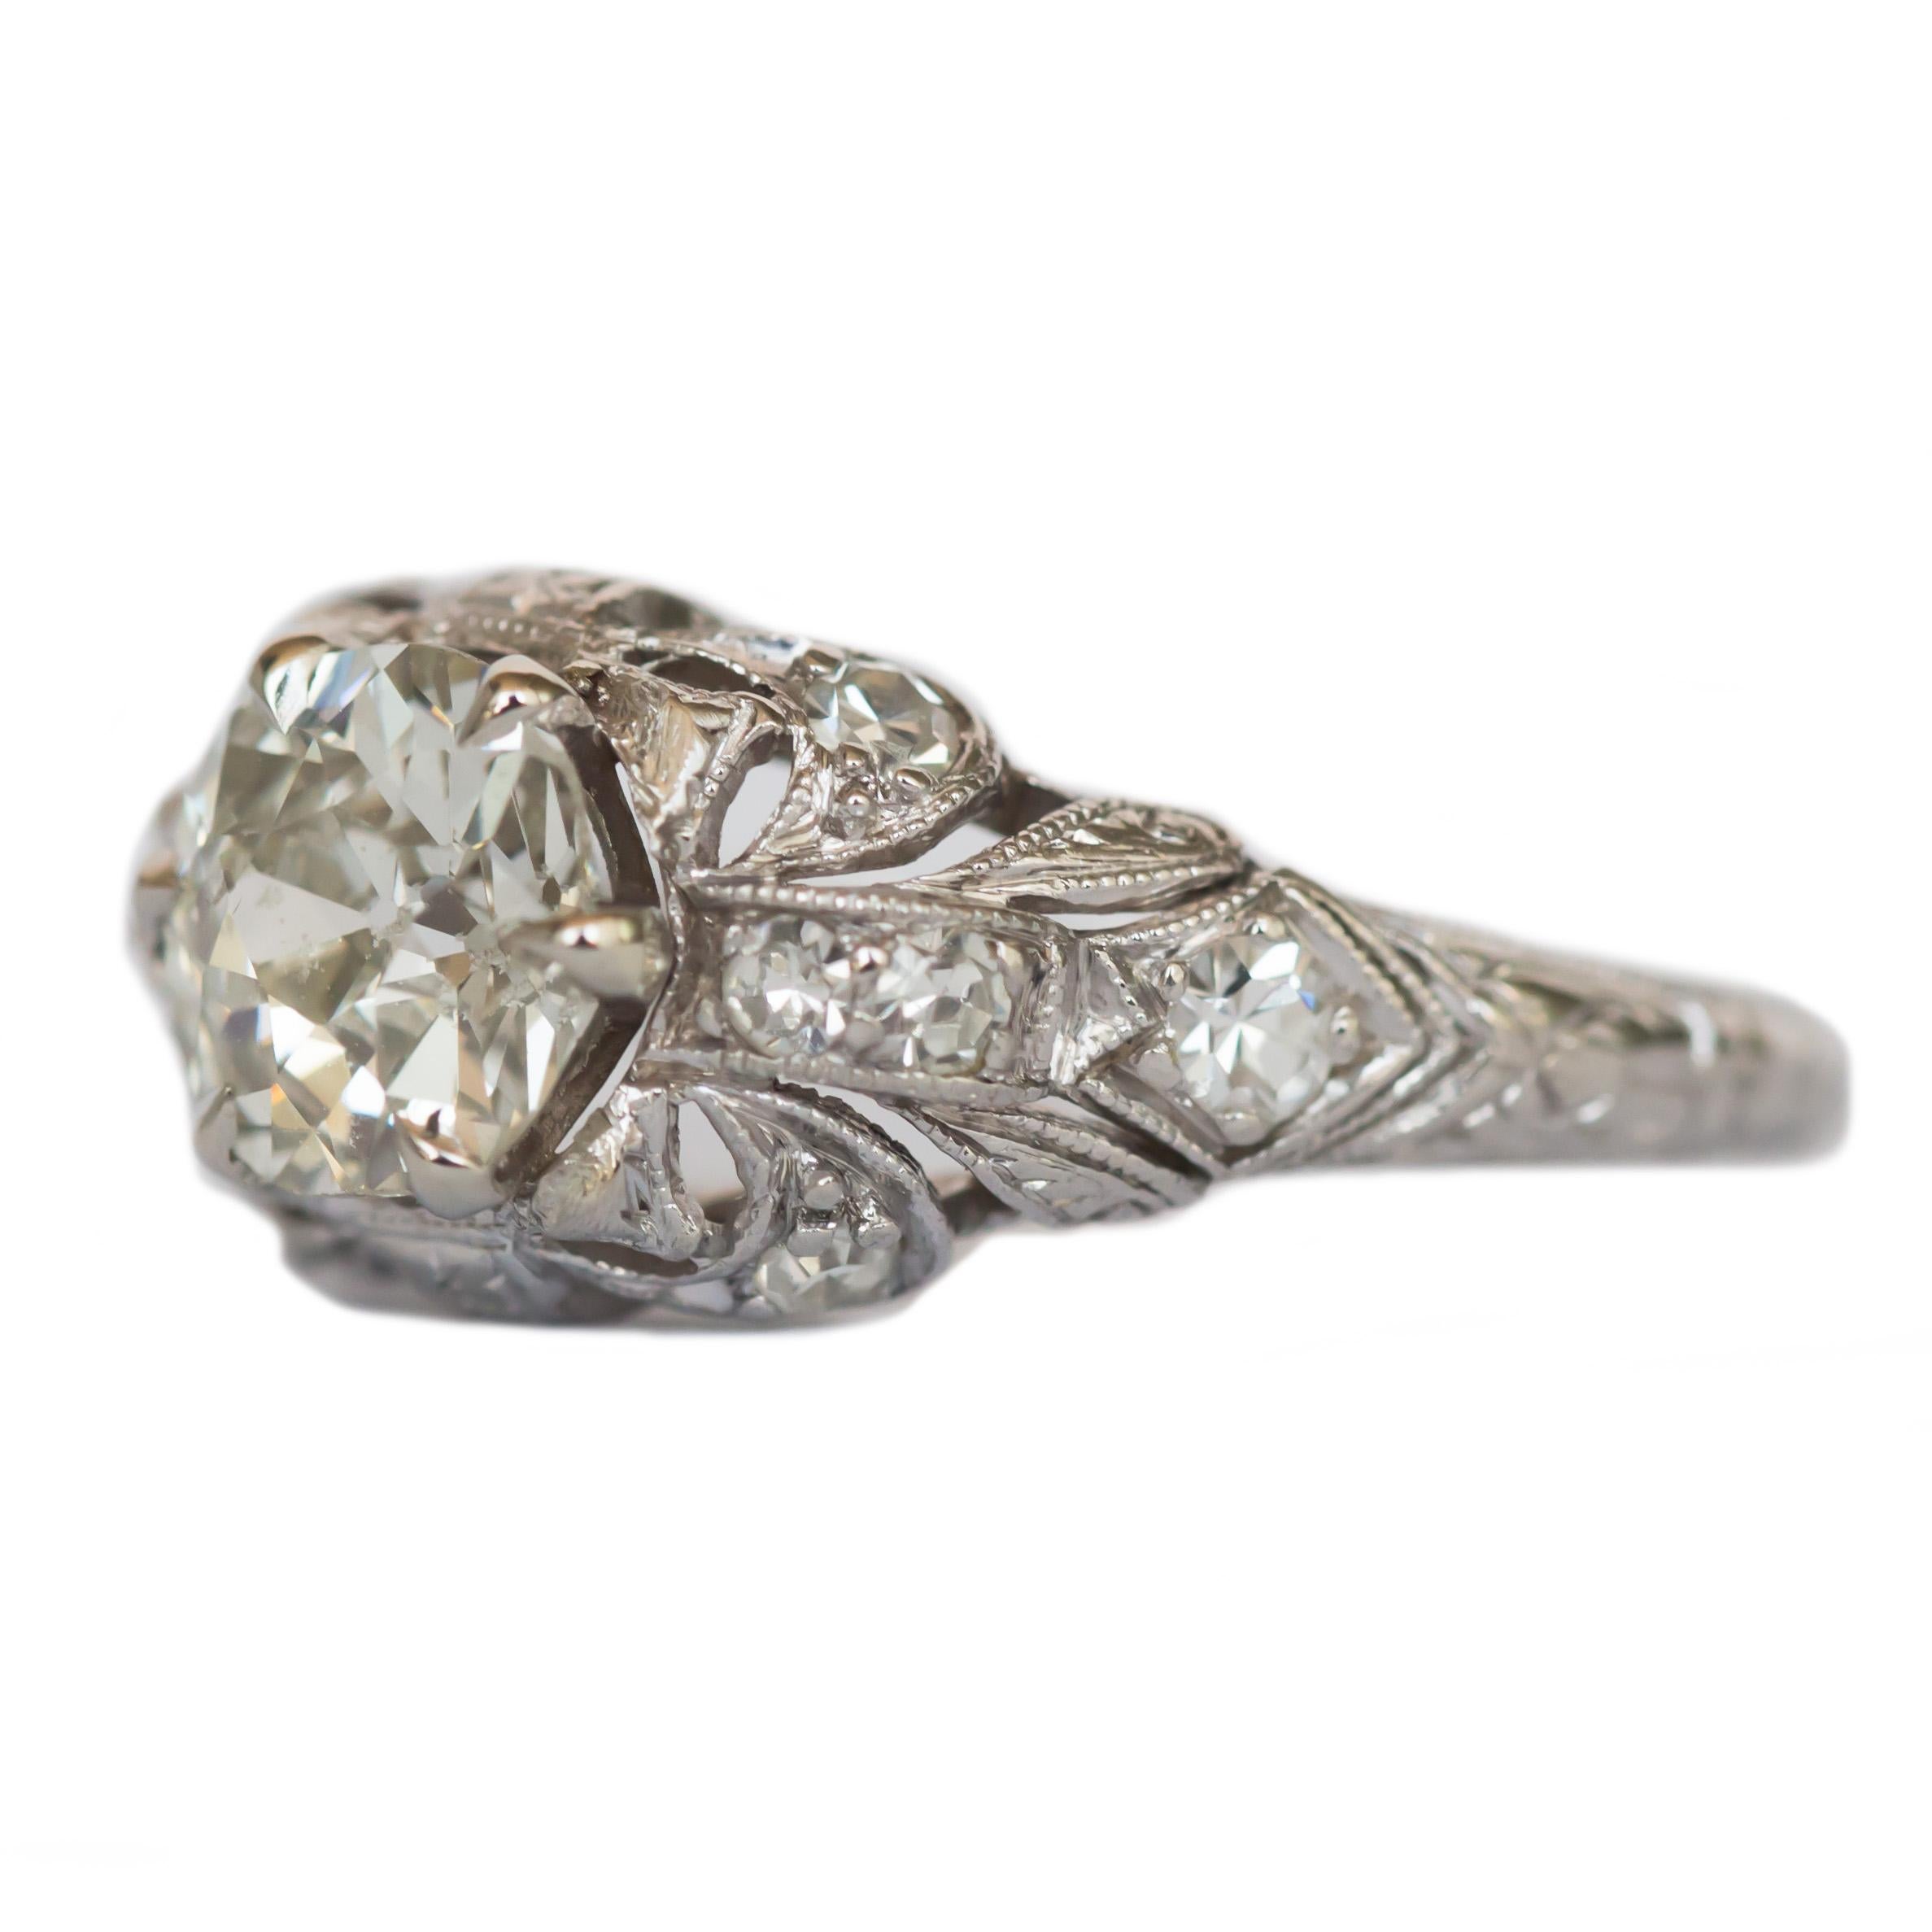 Ring Size: 5.50
Metal Type: Platinum
Weight: 2.9 grams

Center Diamond Details
Shape: Antique Cushion
Carat Weight: .90 carat
Color: J
Clarity: SI1

Side Stone Details: 
Shape: Antique Single Cut 
Total Carat Weight: .10 carat, total weight
Color: